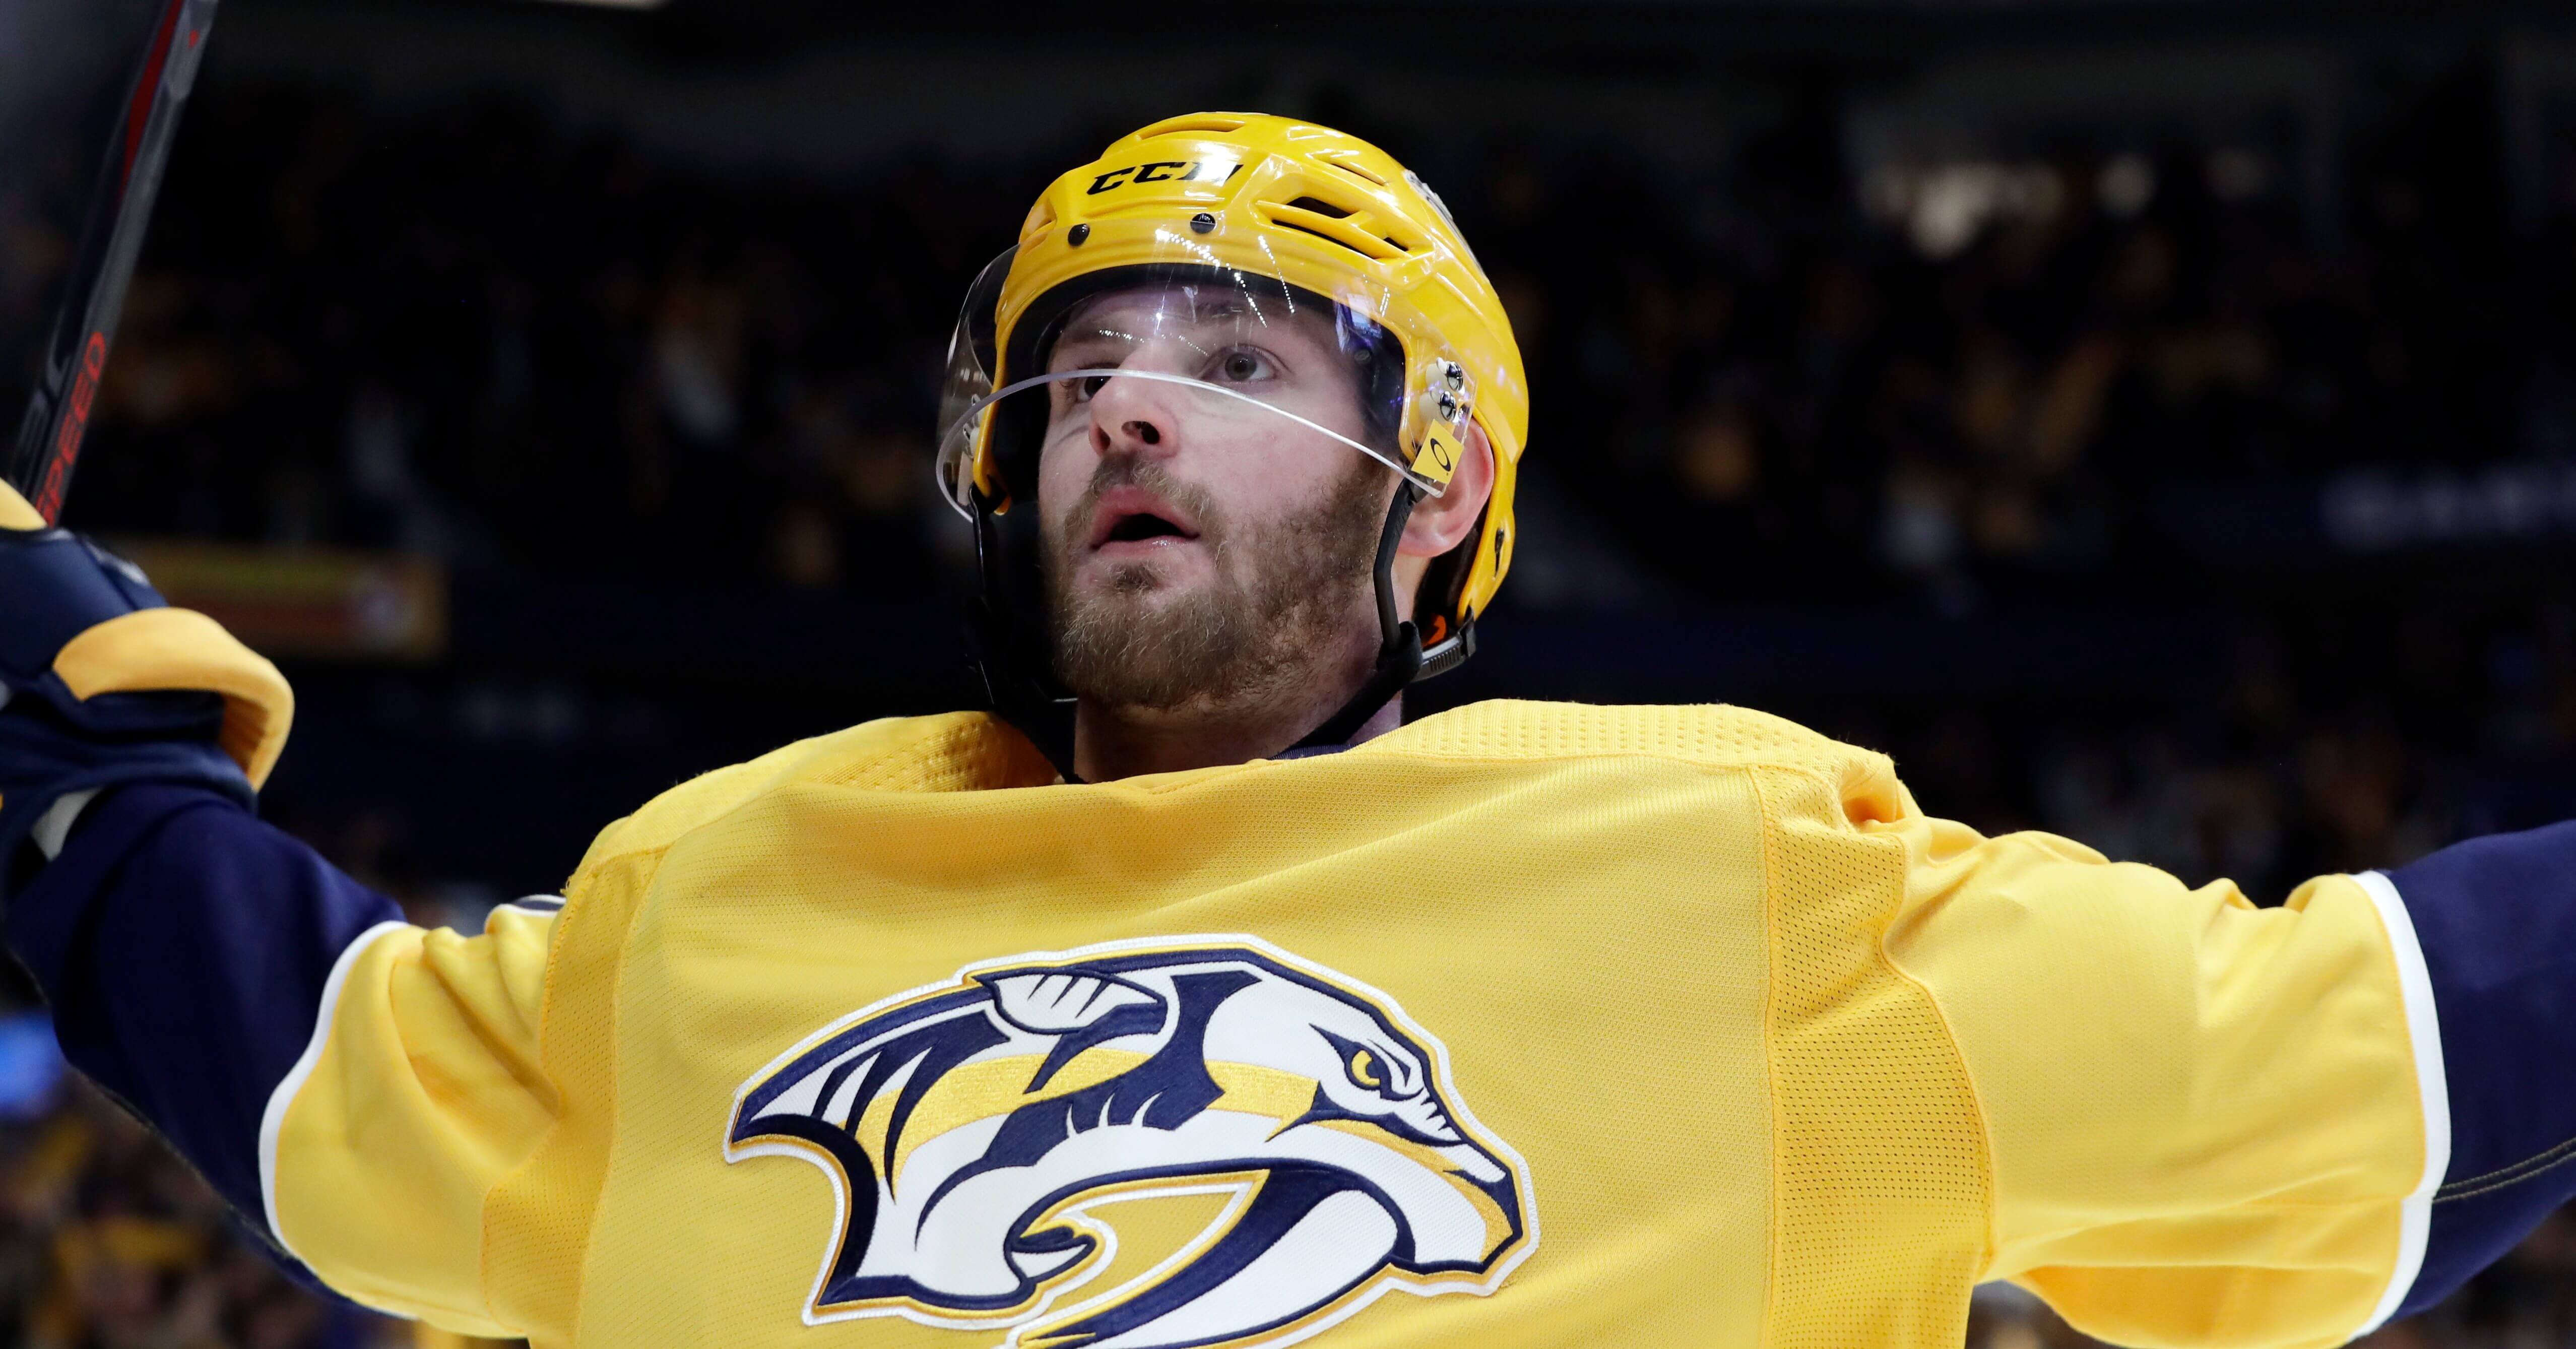 Predators left wing Austin Watson celebrates after scoring a goal against the Anaheim Ducks in the second period of a game in Nashville, Tennessee.